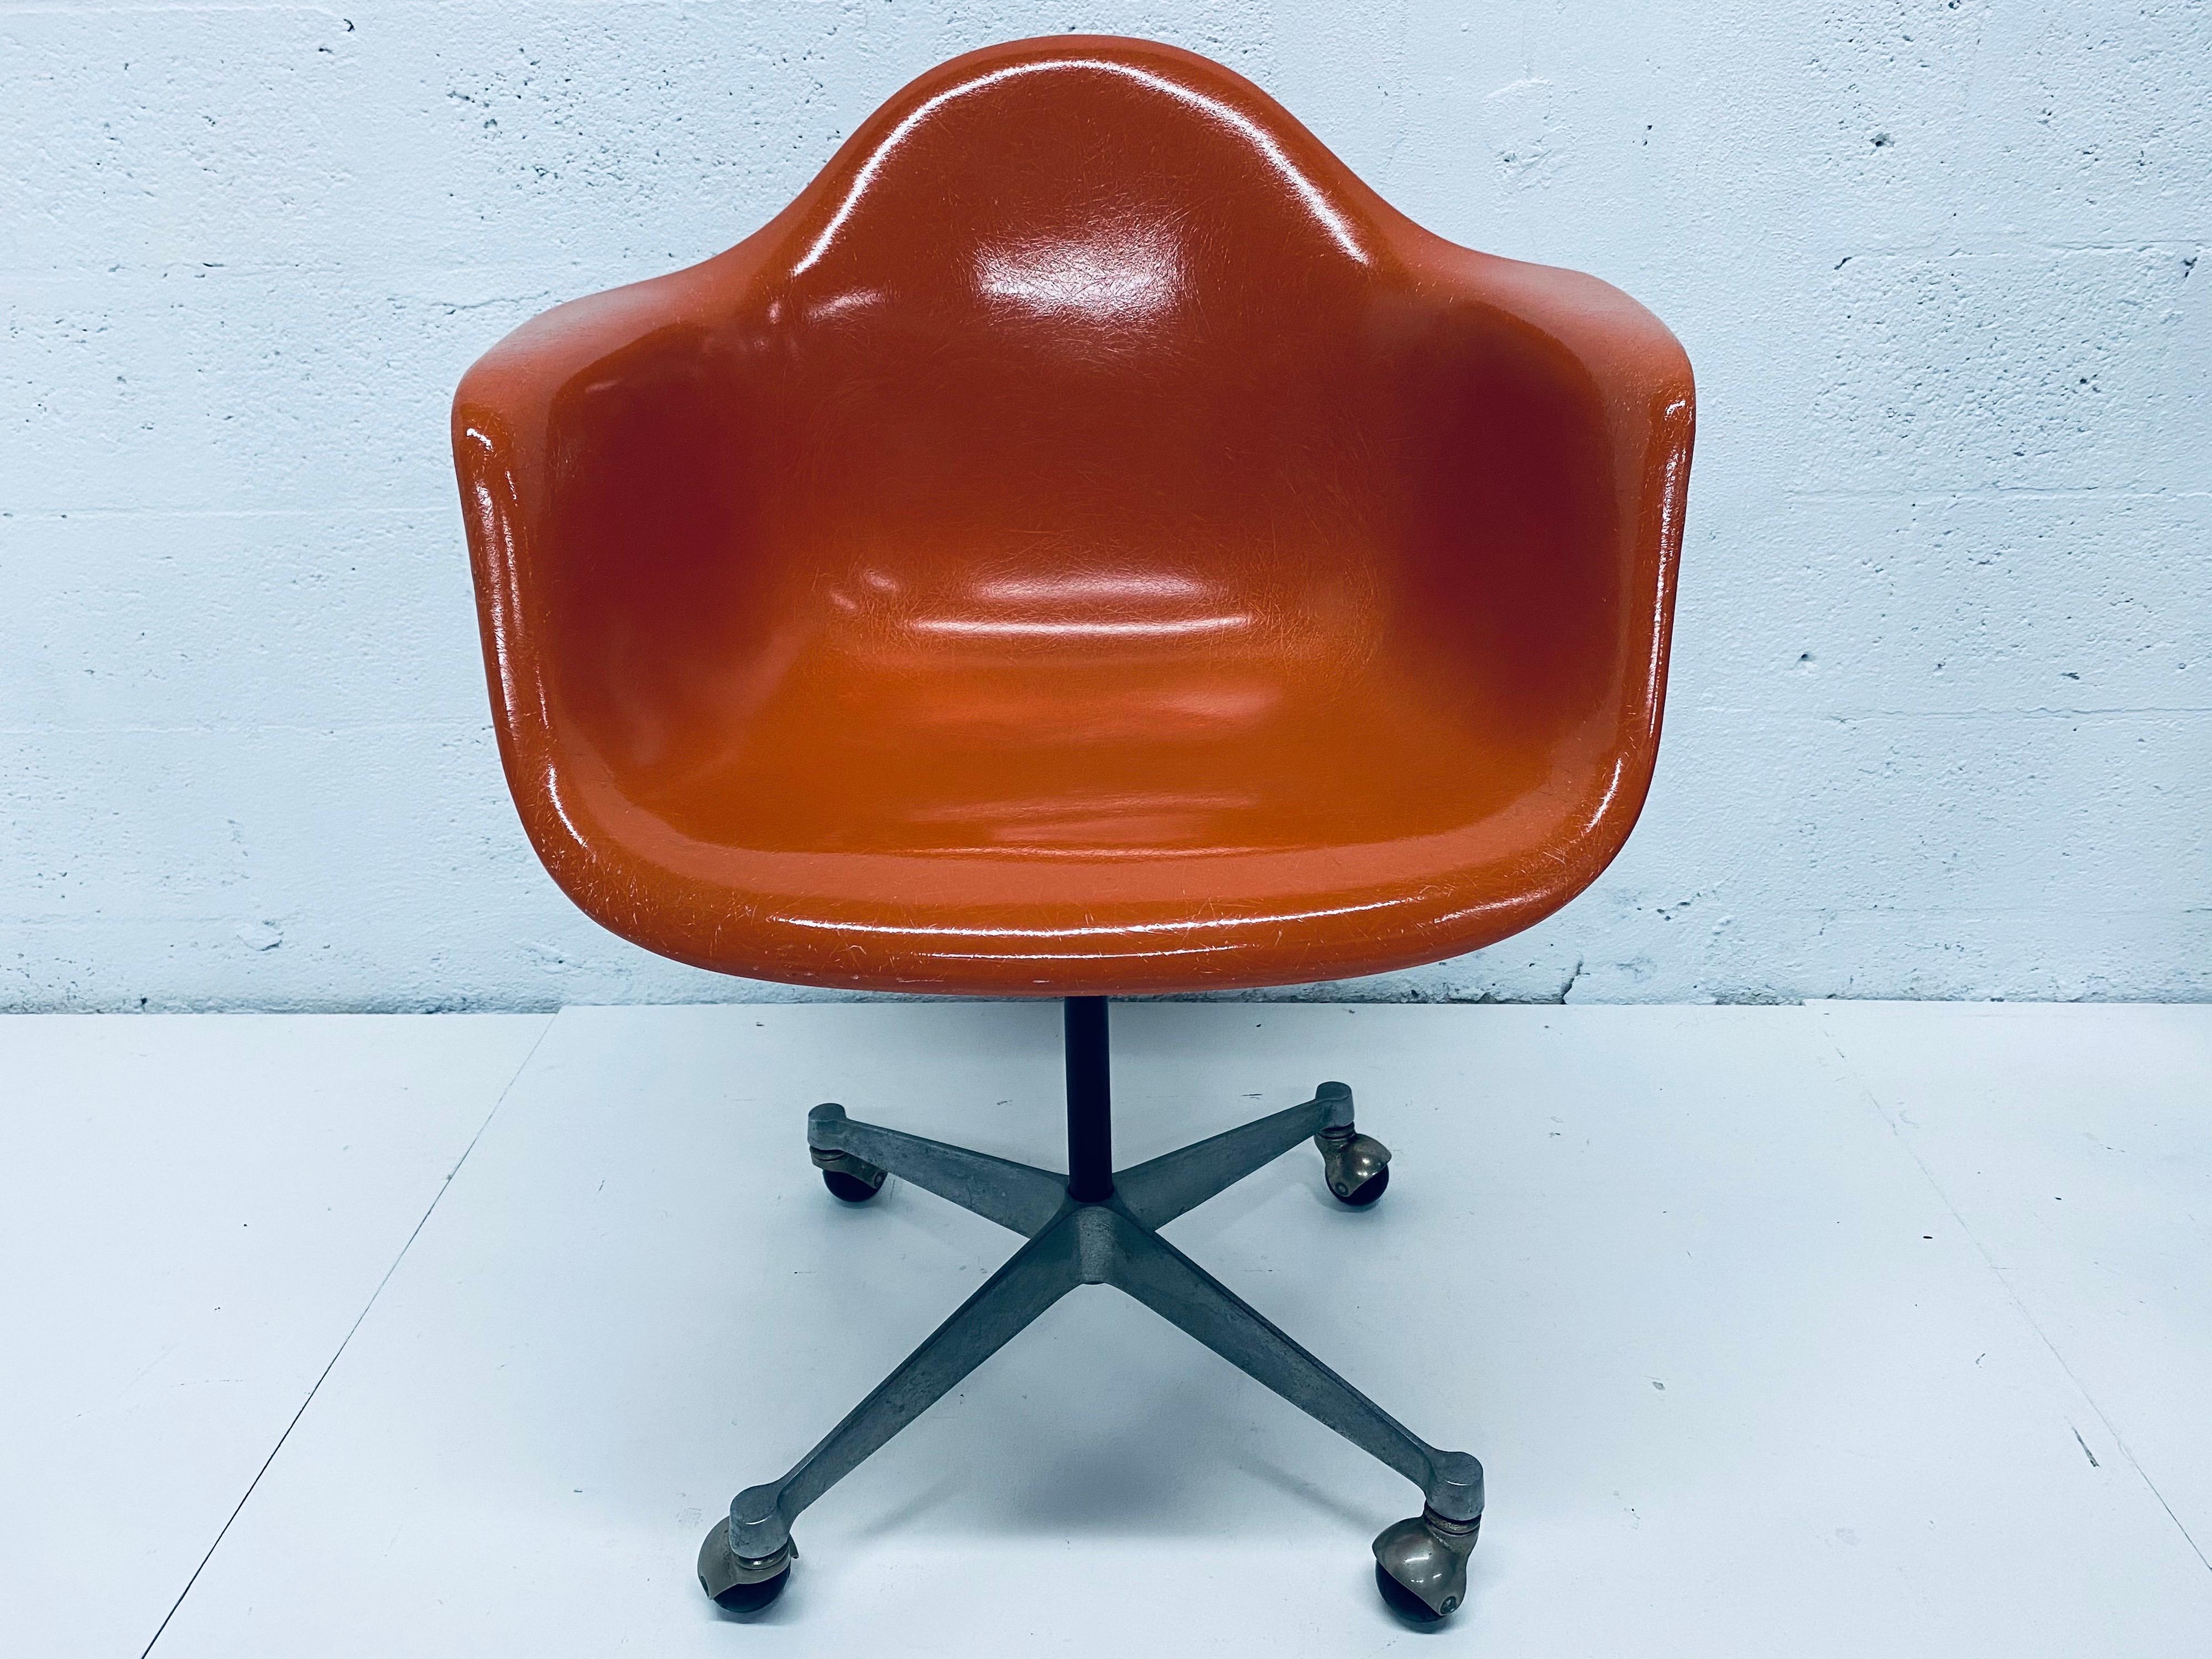 Original Charles and Ray Eames designed burnt orange moulded fiberglass desk chair on casters for Herman Miller, 1960s. Chair swivels smoothly. Not height adjustable.